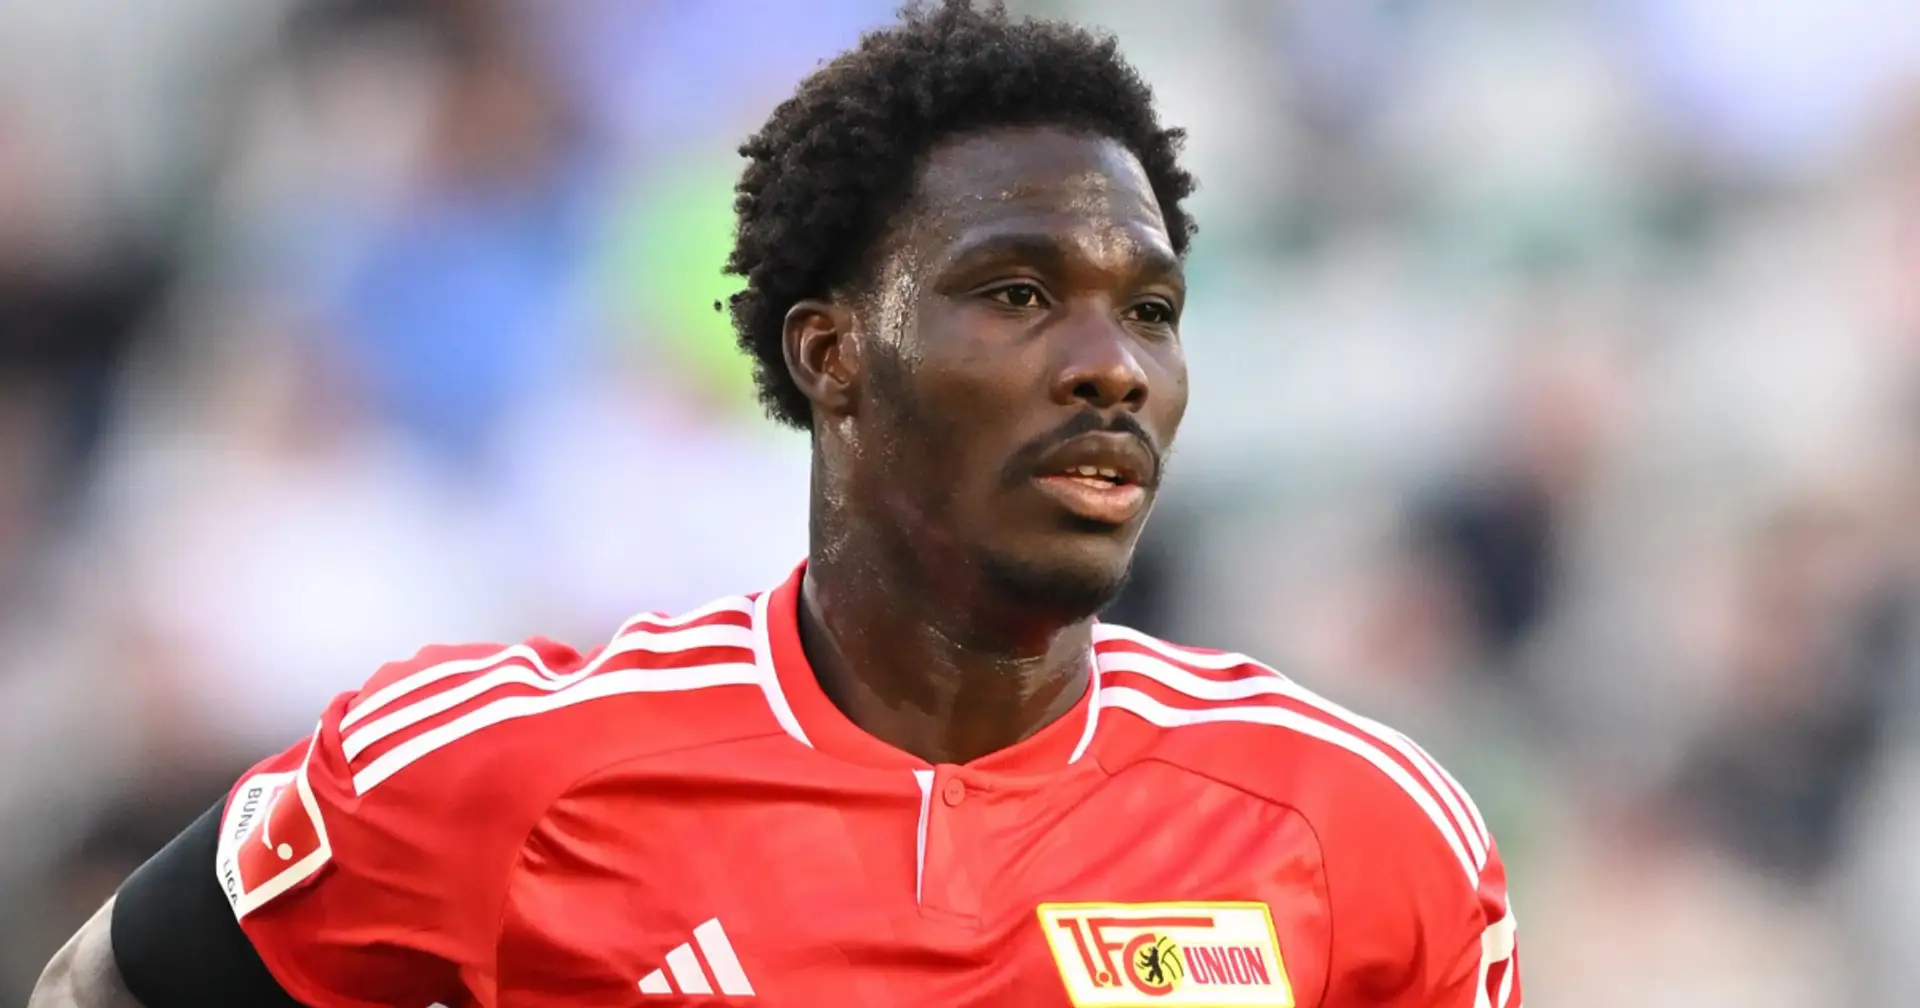 Union Berlin boss reveals David Datro Fofana reaction after one-week suspension for attitude issues